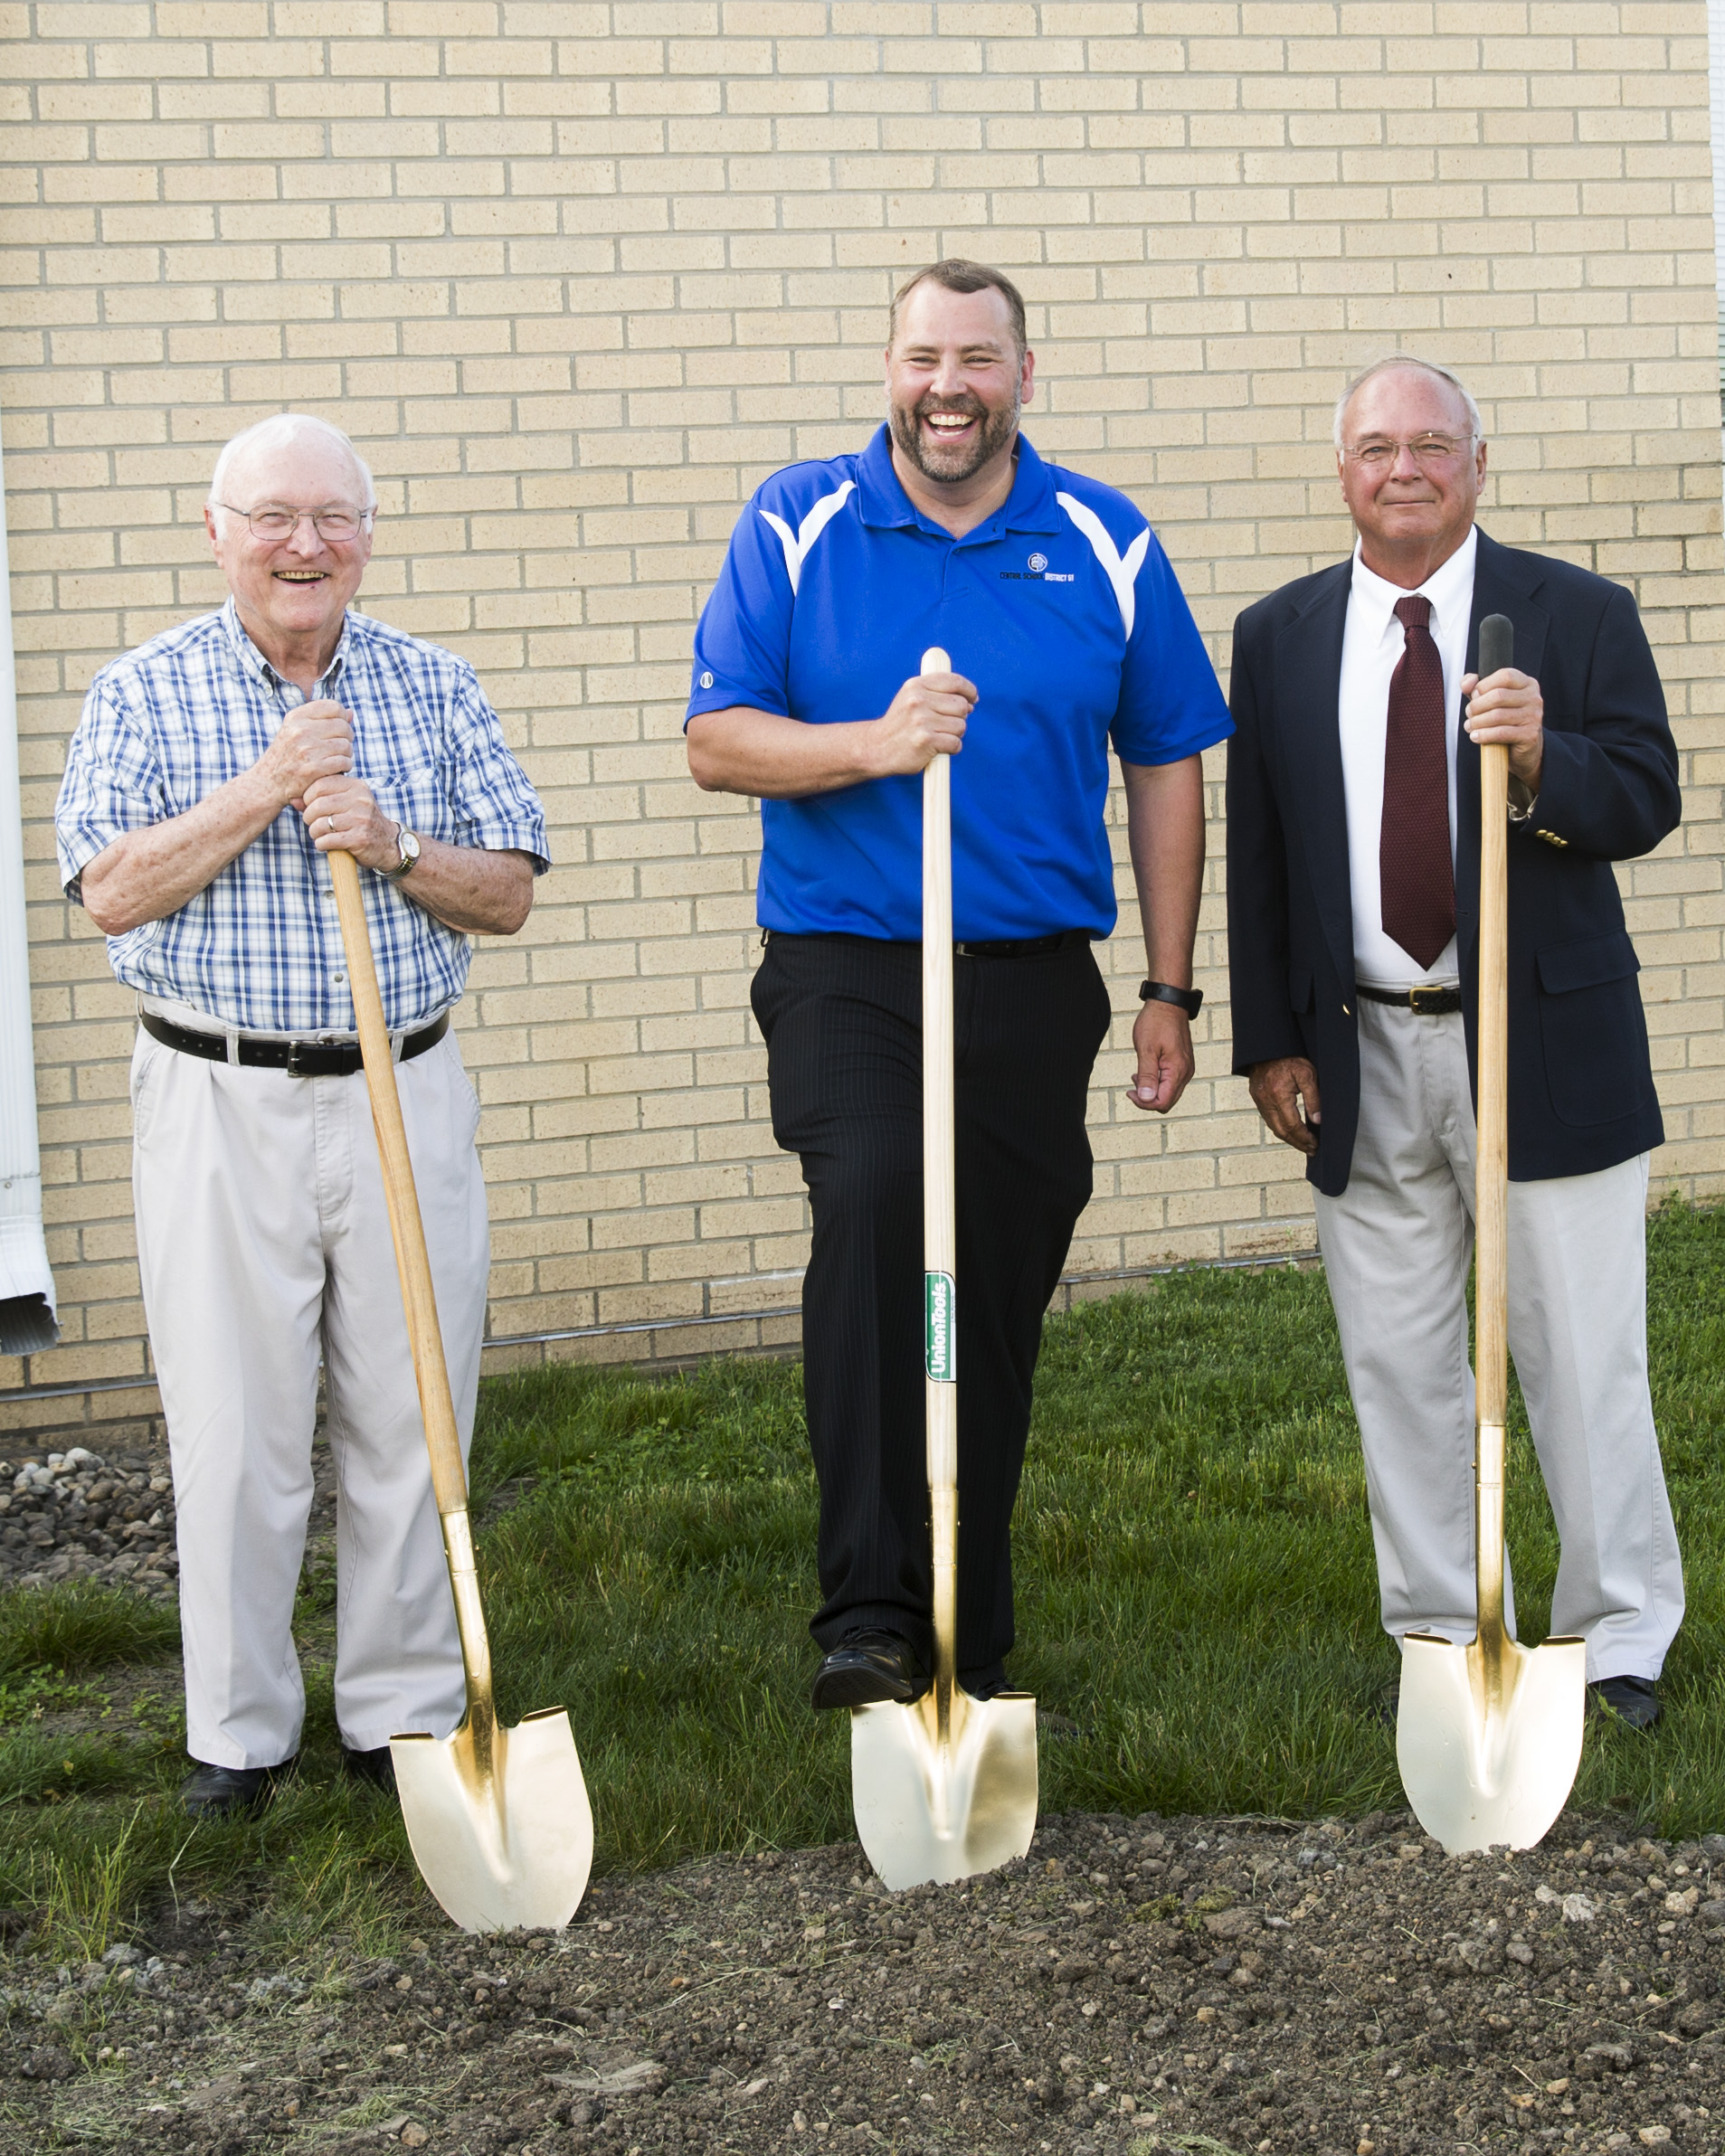 Members of the Board of Education posing the same as the teachers and with their own shovels.